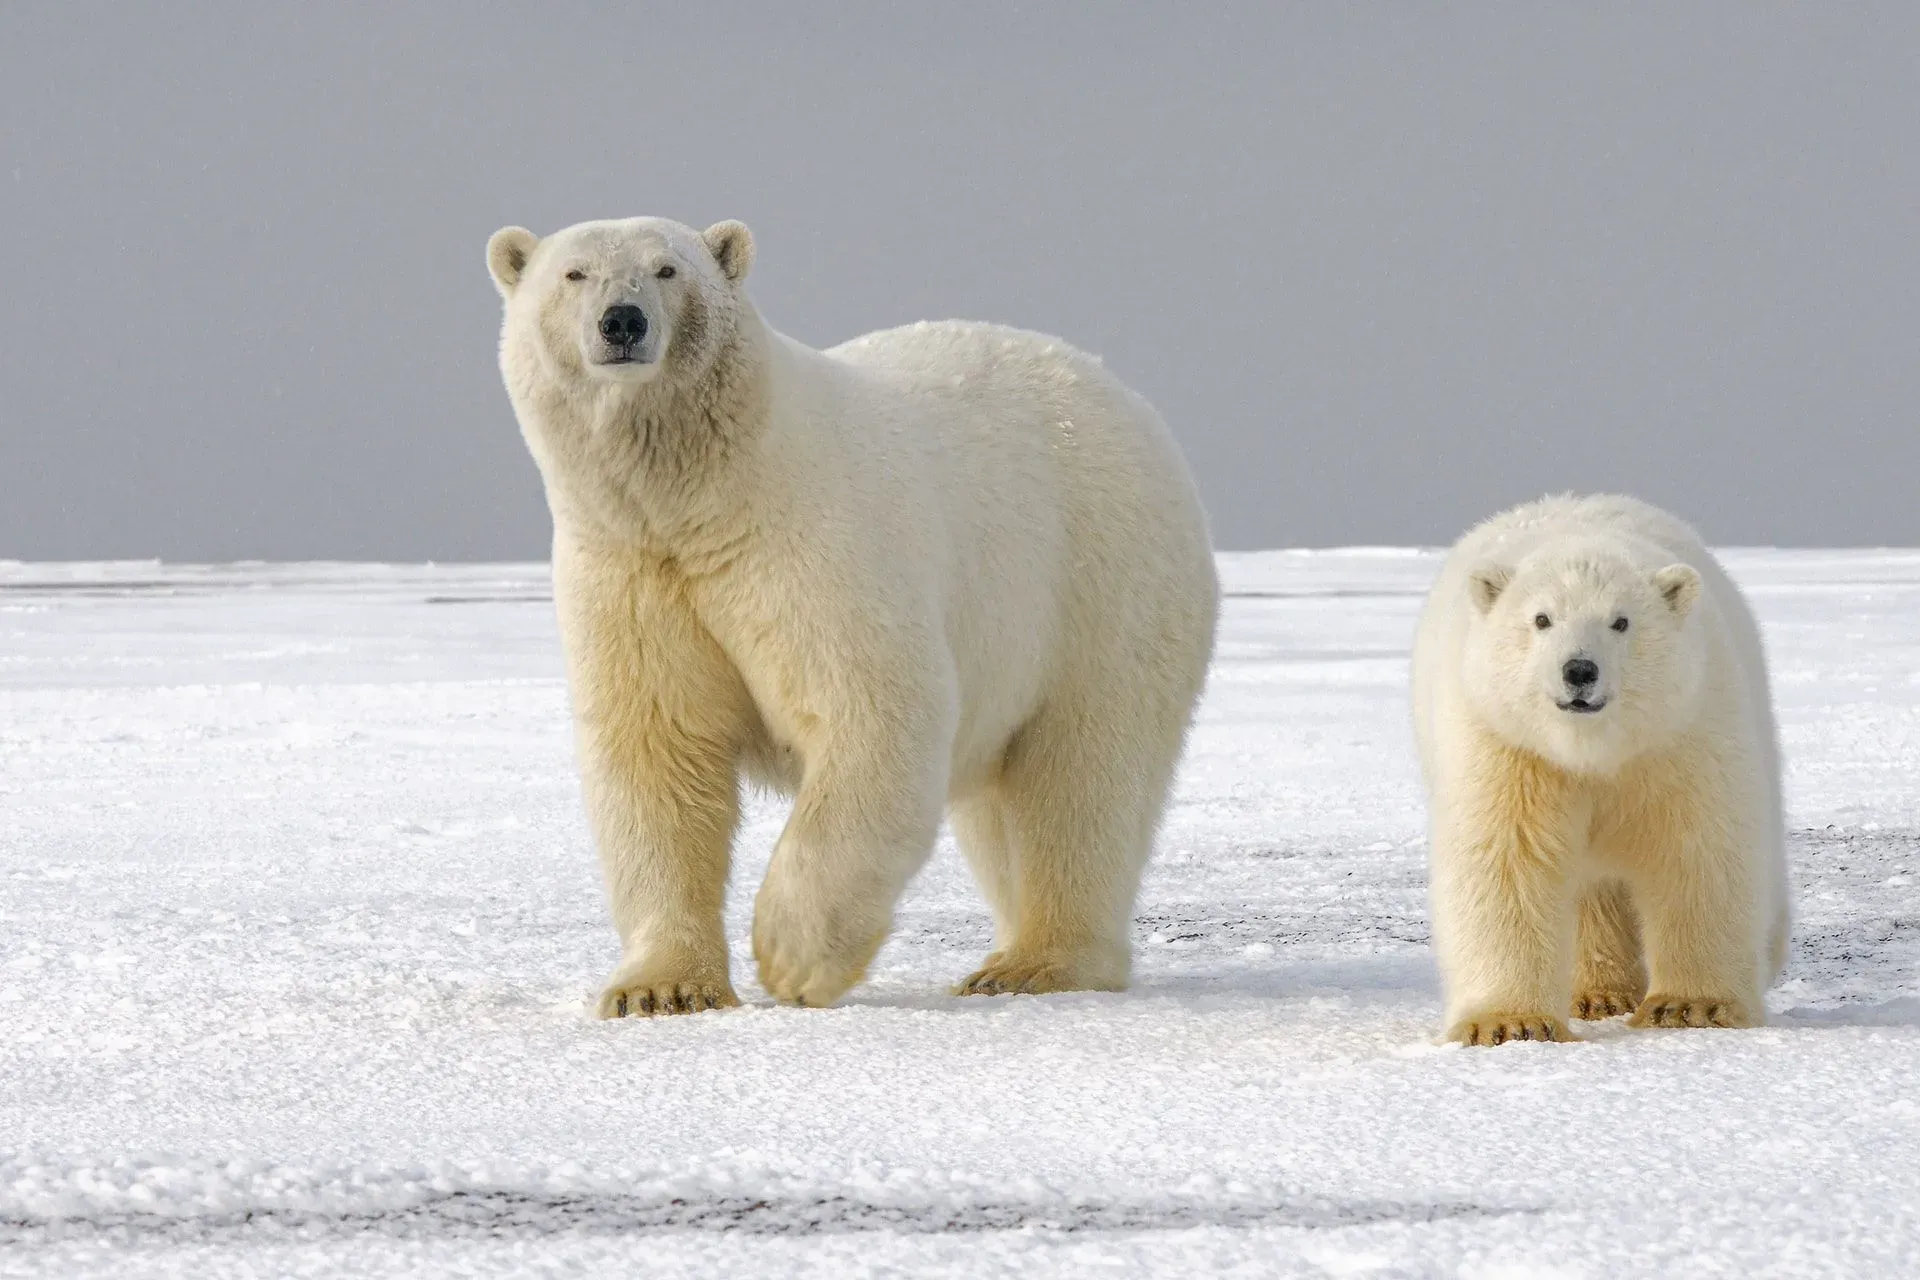 More than 40 animal species that live in the North Pole are generally known as Arctic creatures.